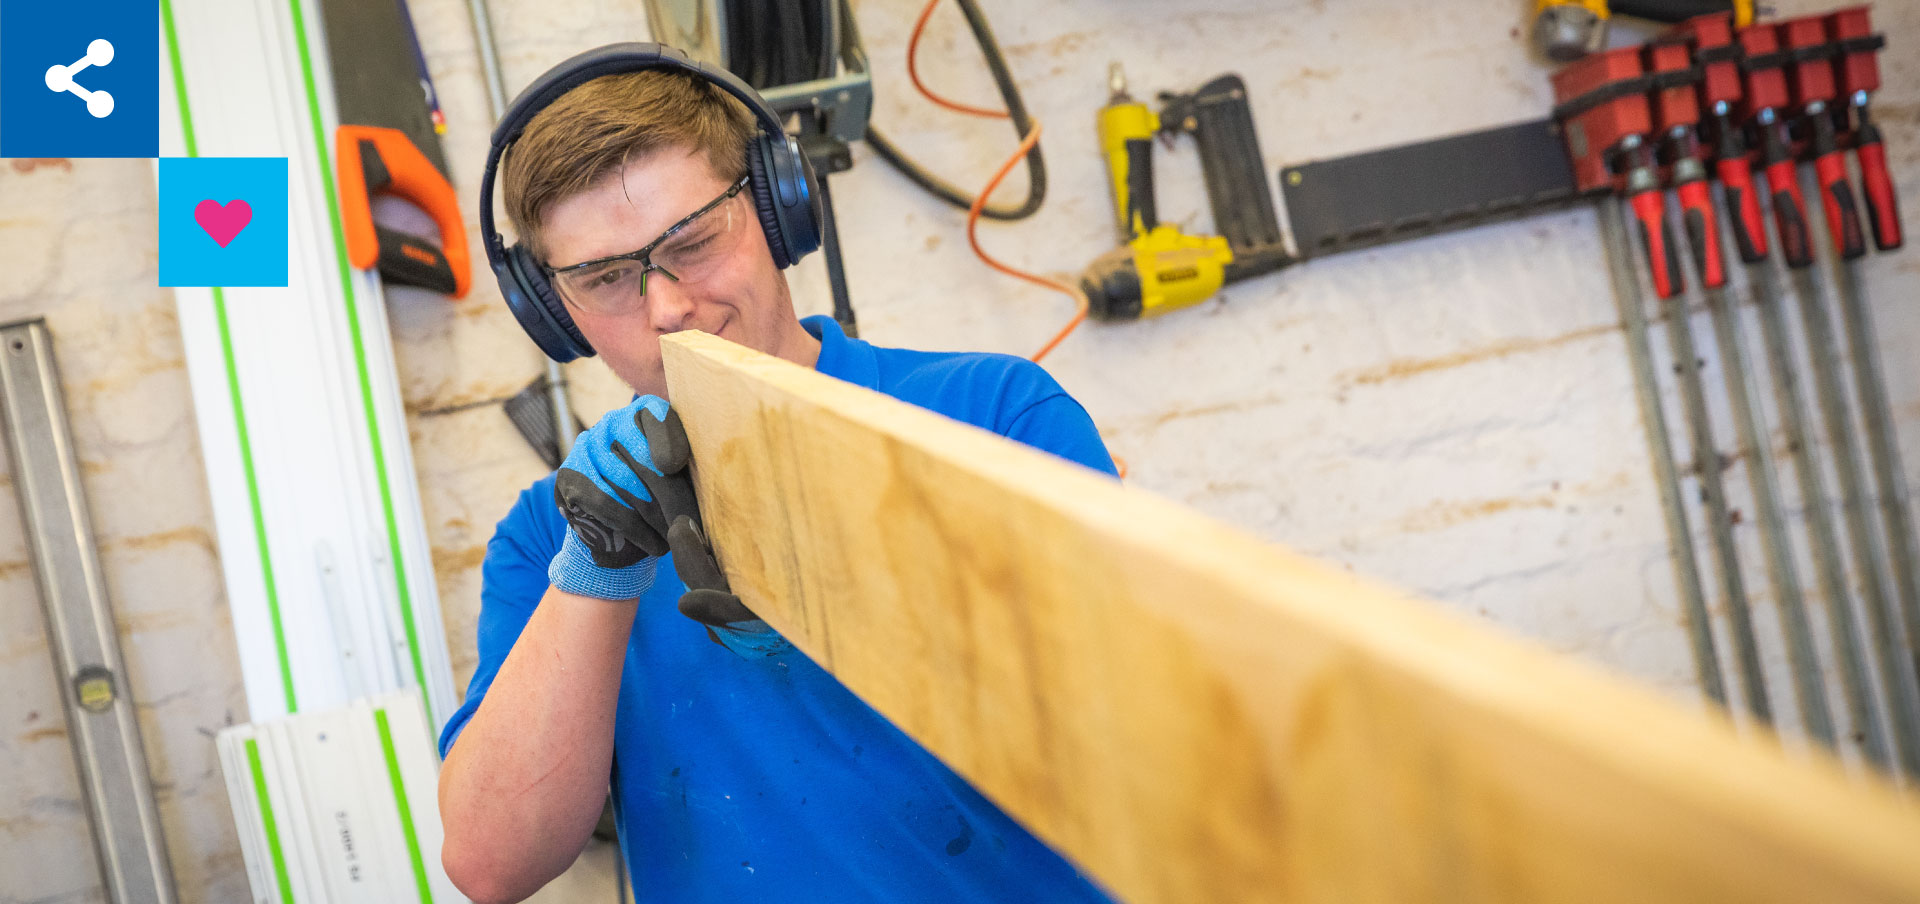 Dominic working at his joinery business